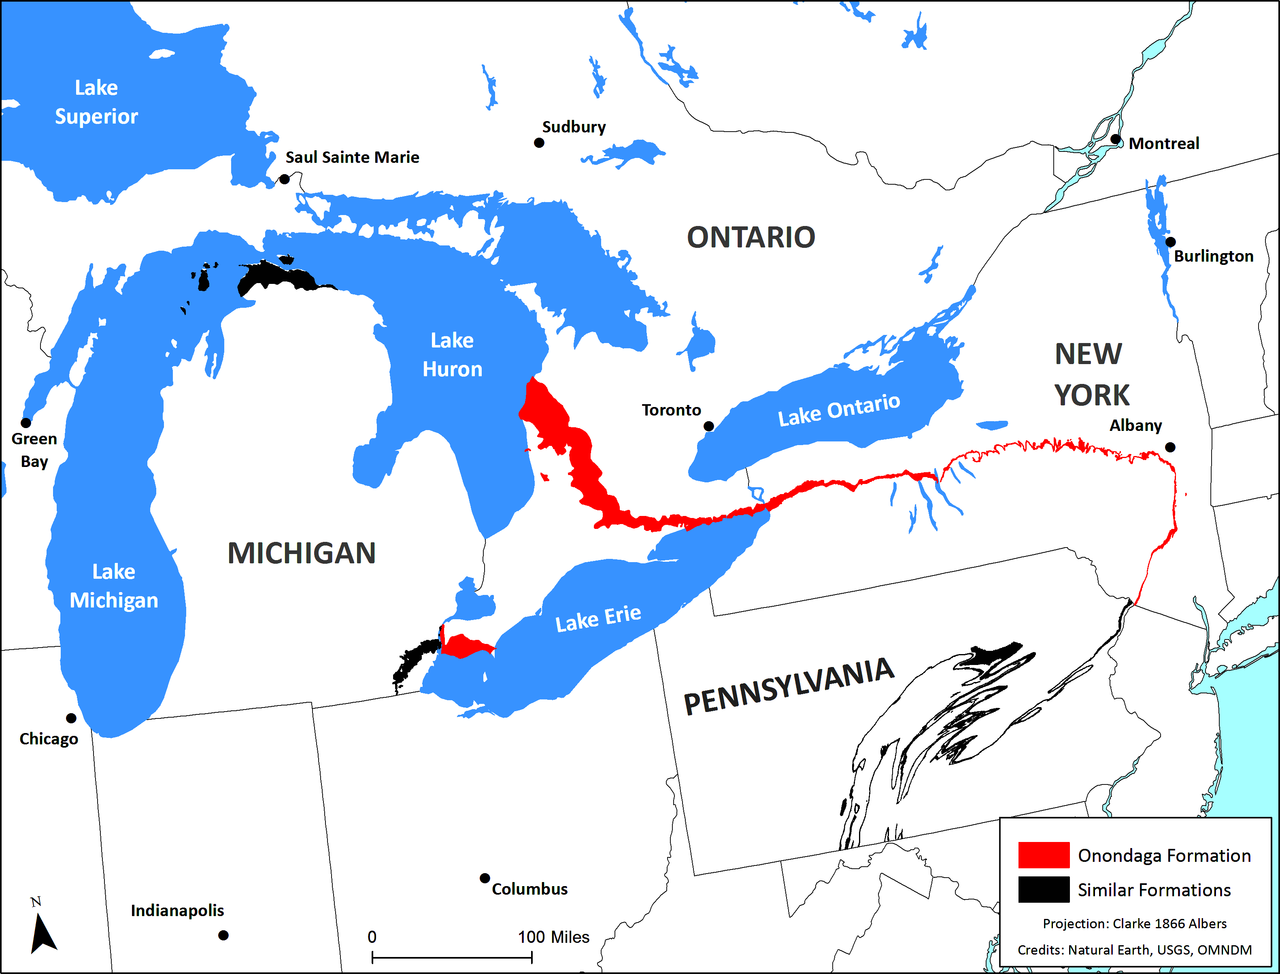 Map showing the Onondaga chert formation stretching from New York west into Ontario, Canada, and into Michigan.